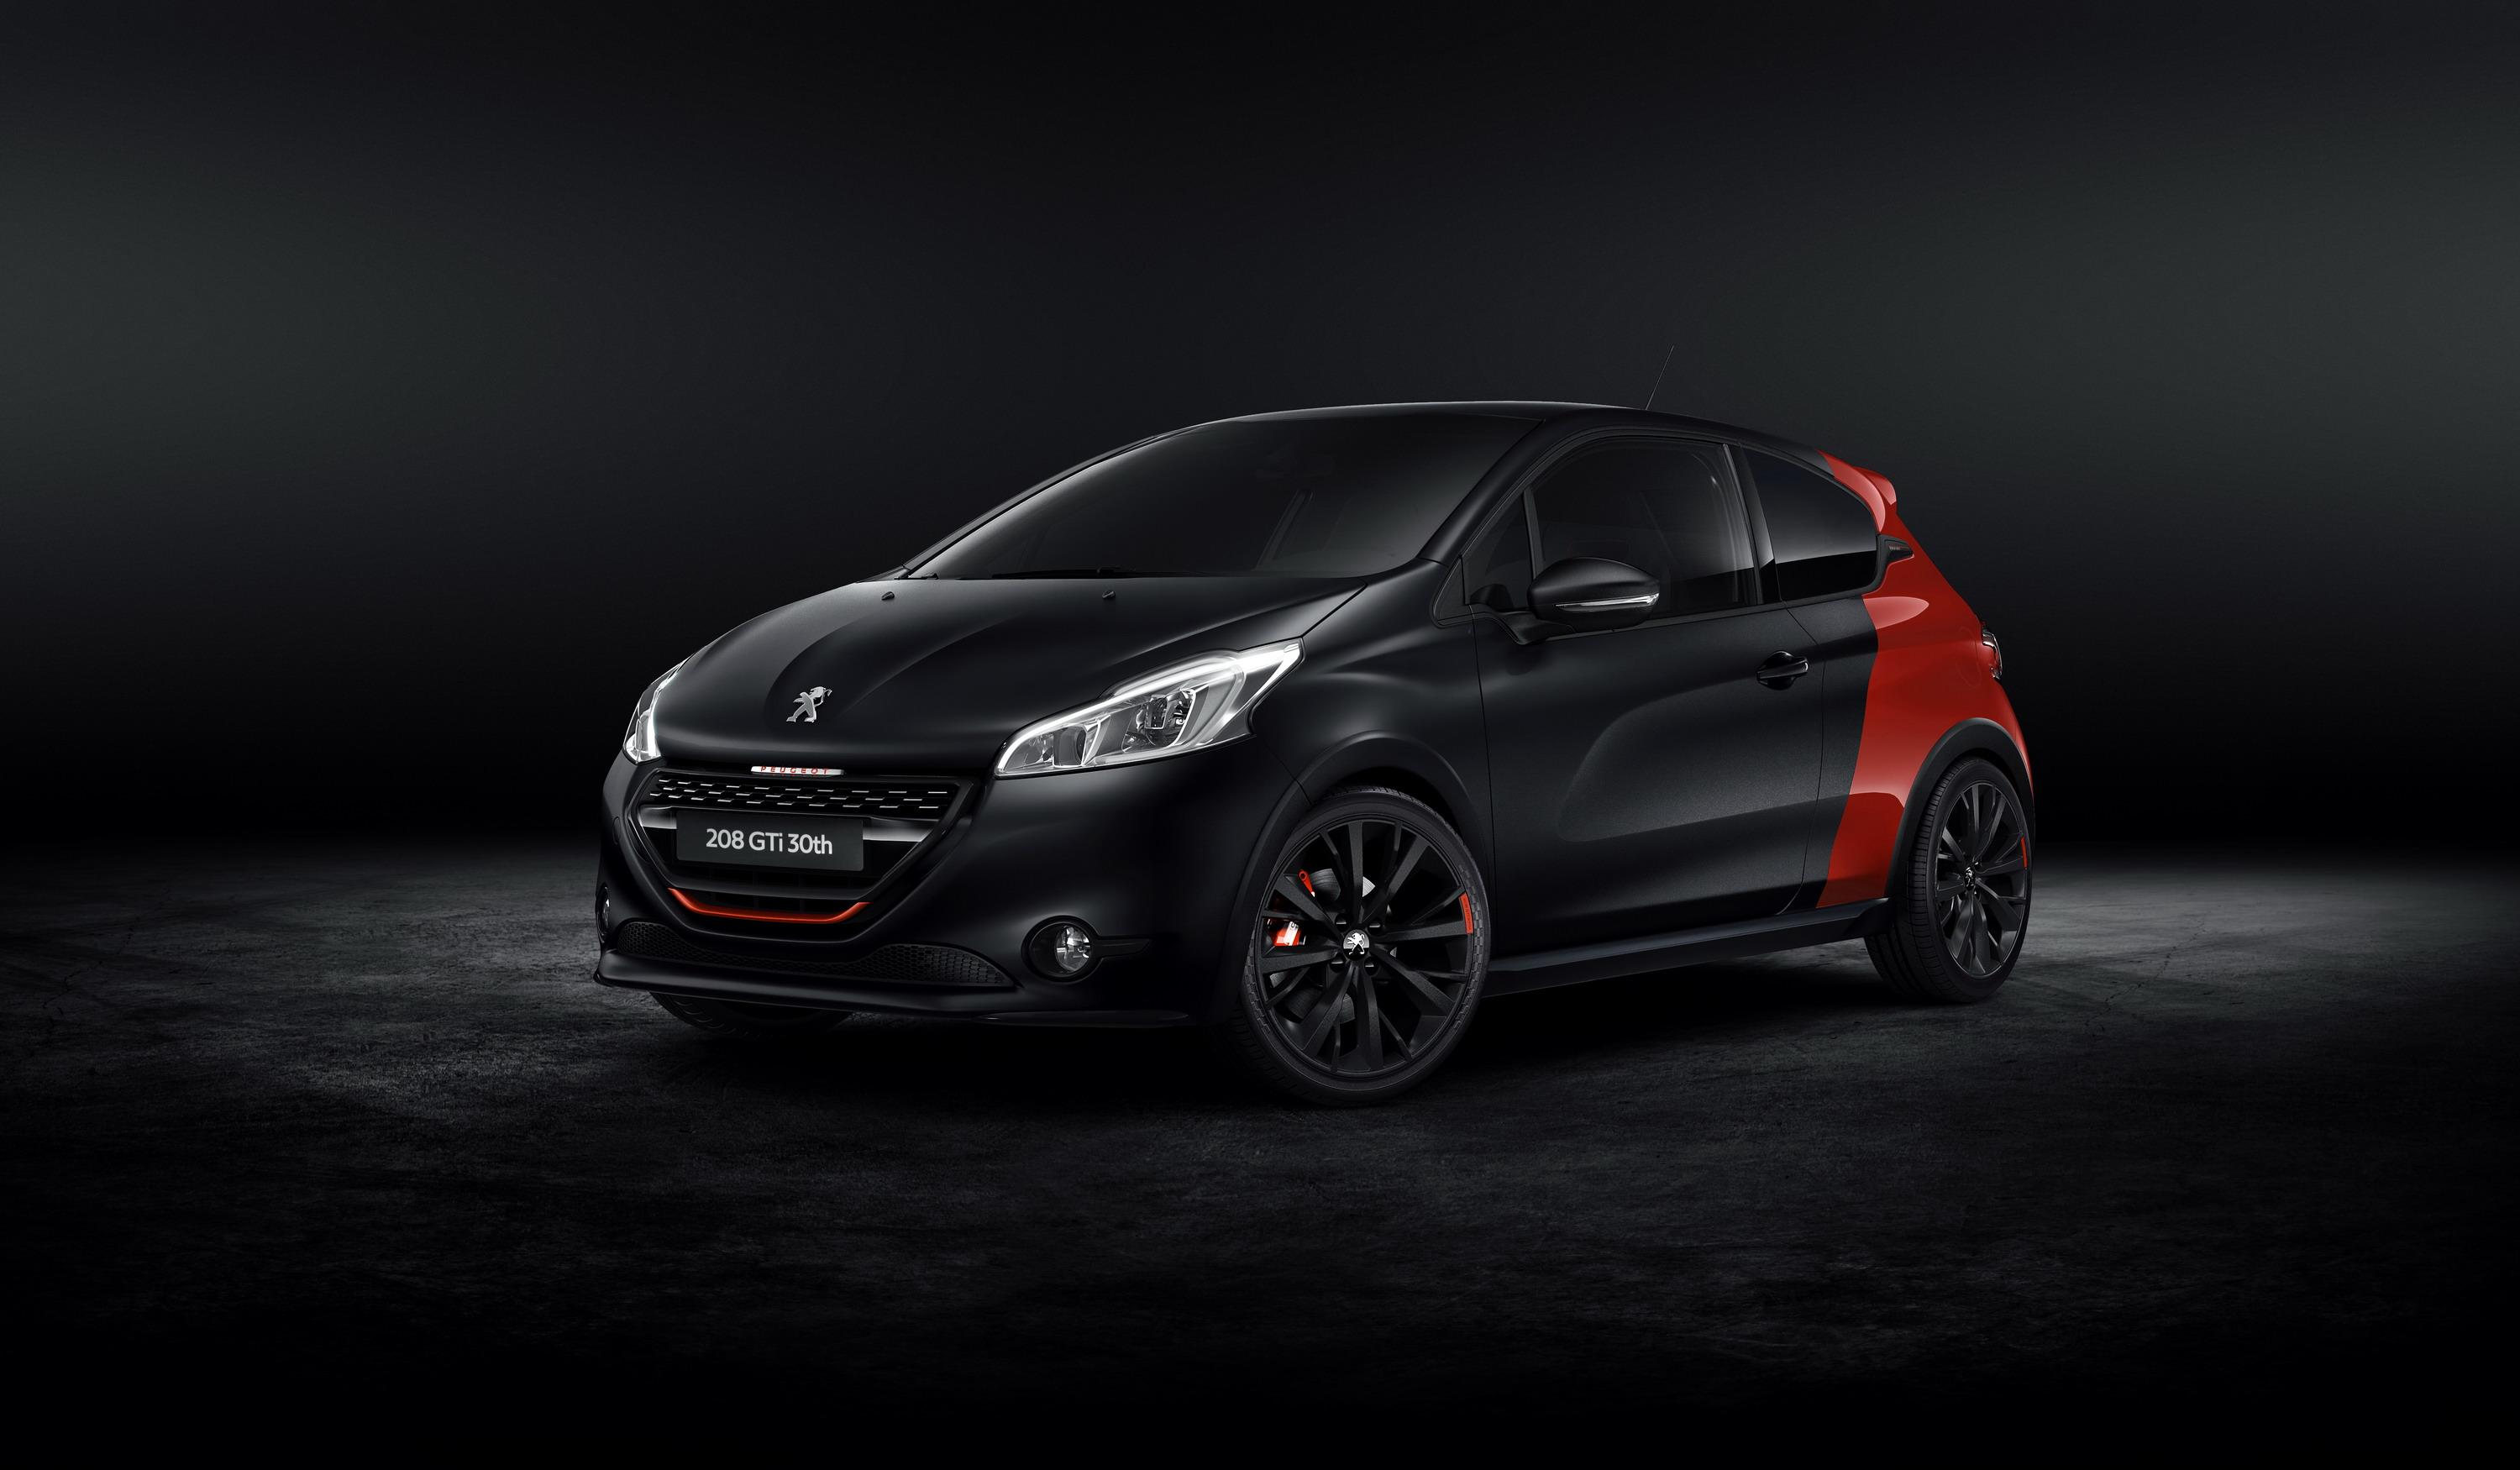 Peugeot 208 GTi 30th Anniversary Edition Picture, Photo